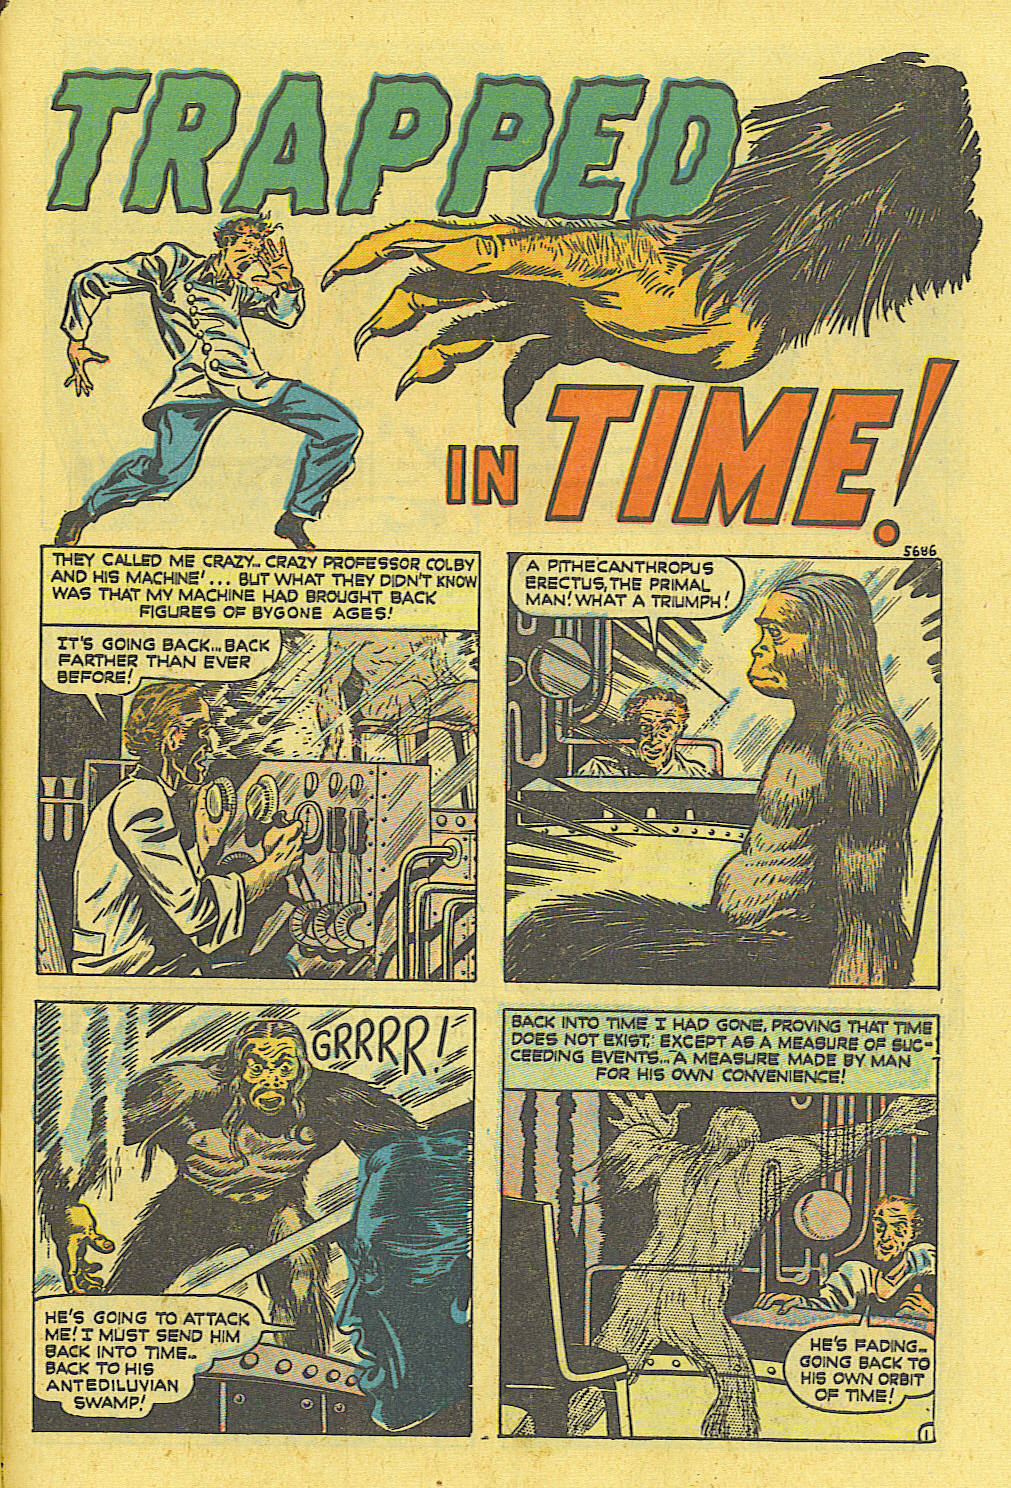 Marvel Tales (1949) 95 Page 20